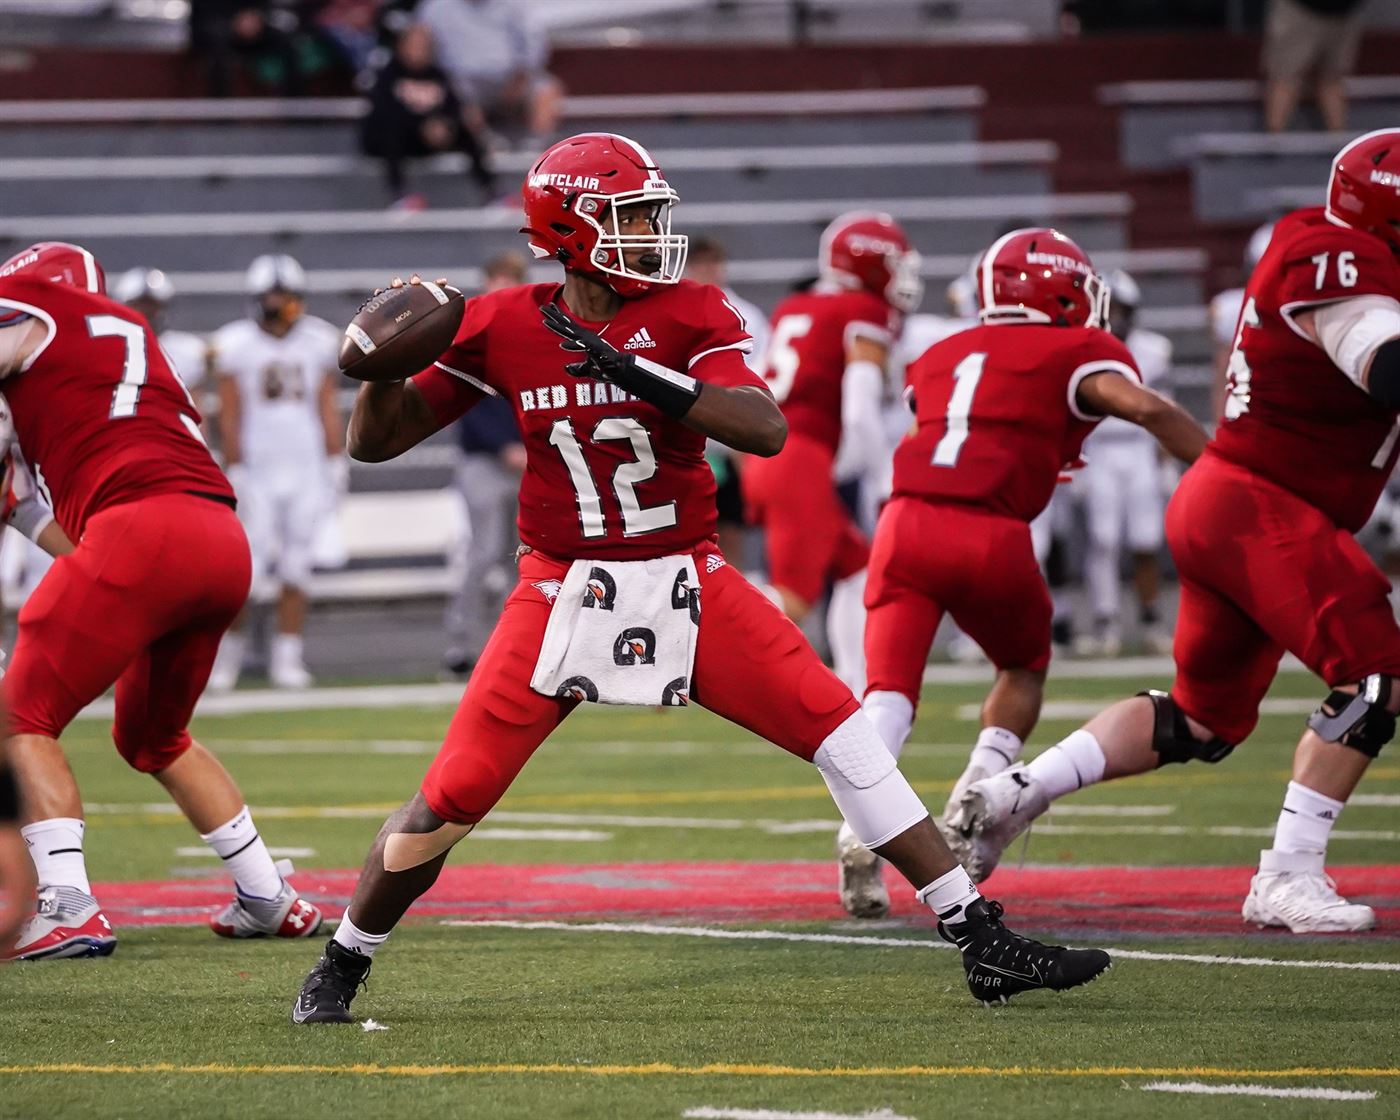 Burch has complied 5,000 yards passing in 31+ games played. Photo courtesy of David Venezia